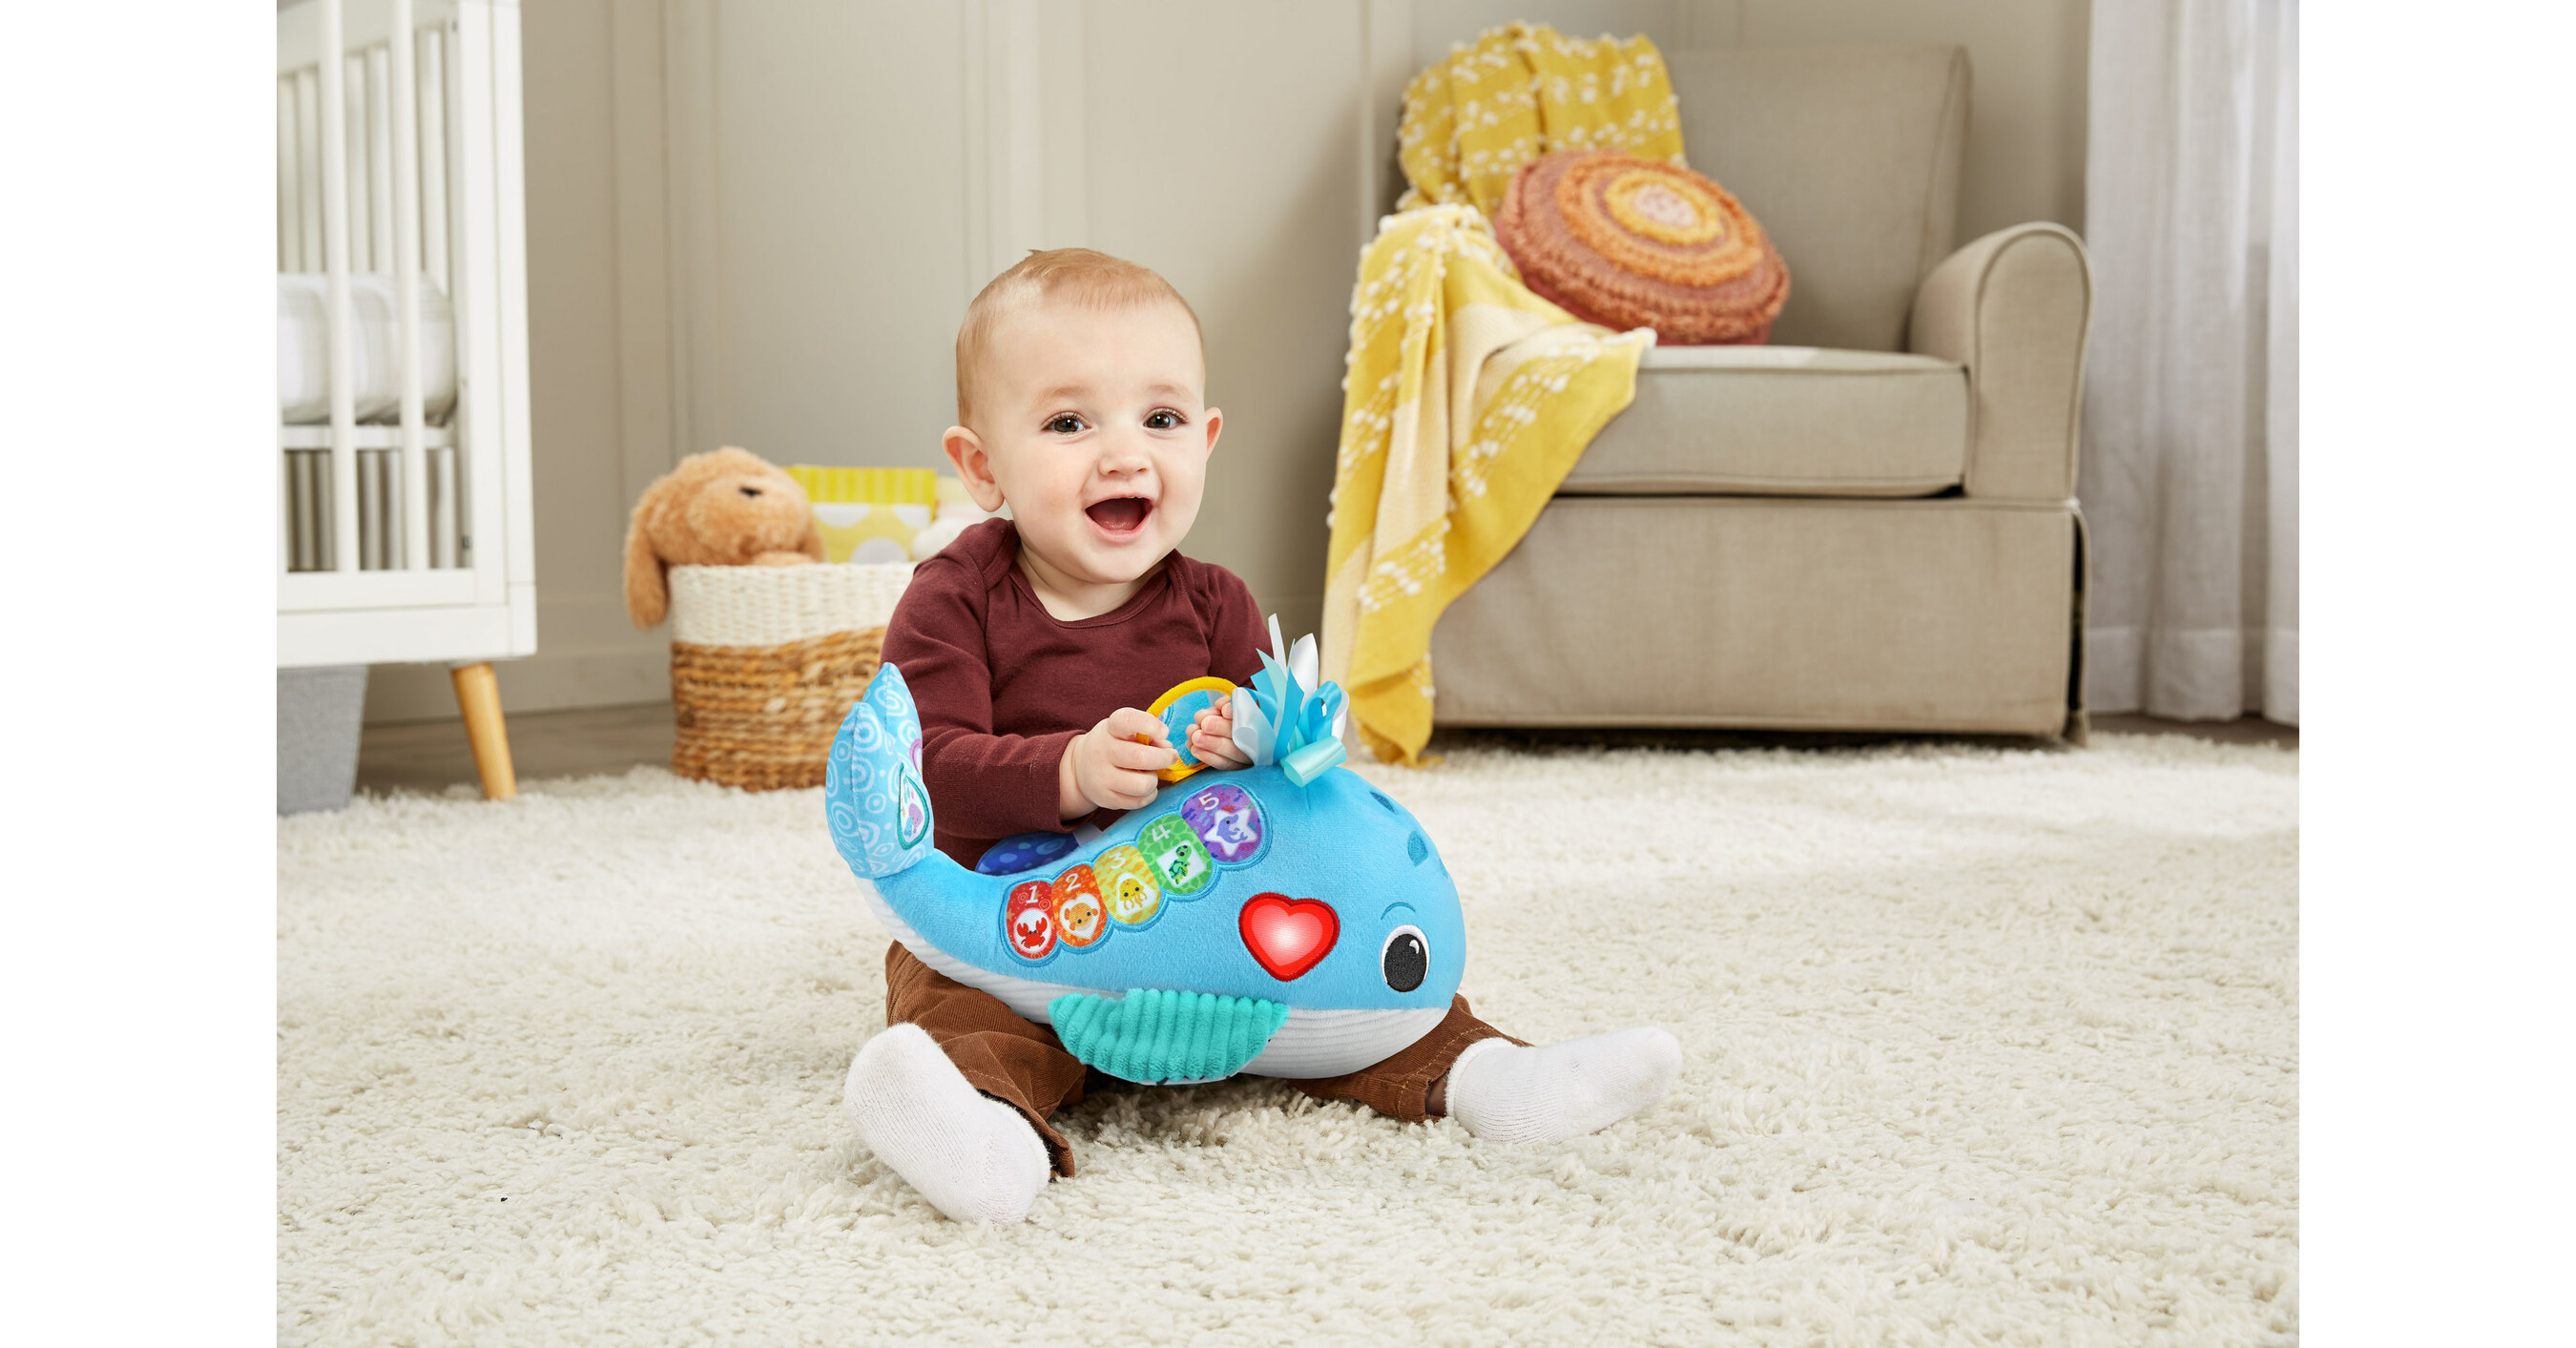 Vtech Toys 3-in-1 Tummy Time to Toddler Piano